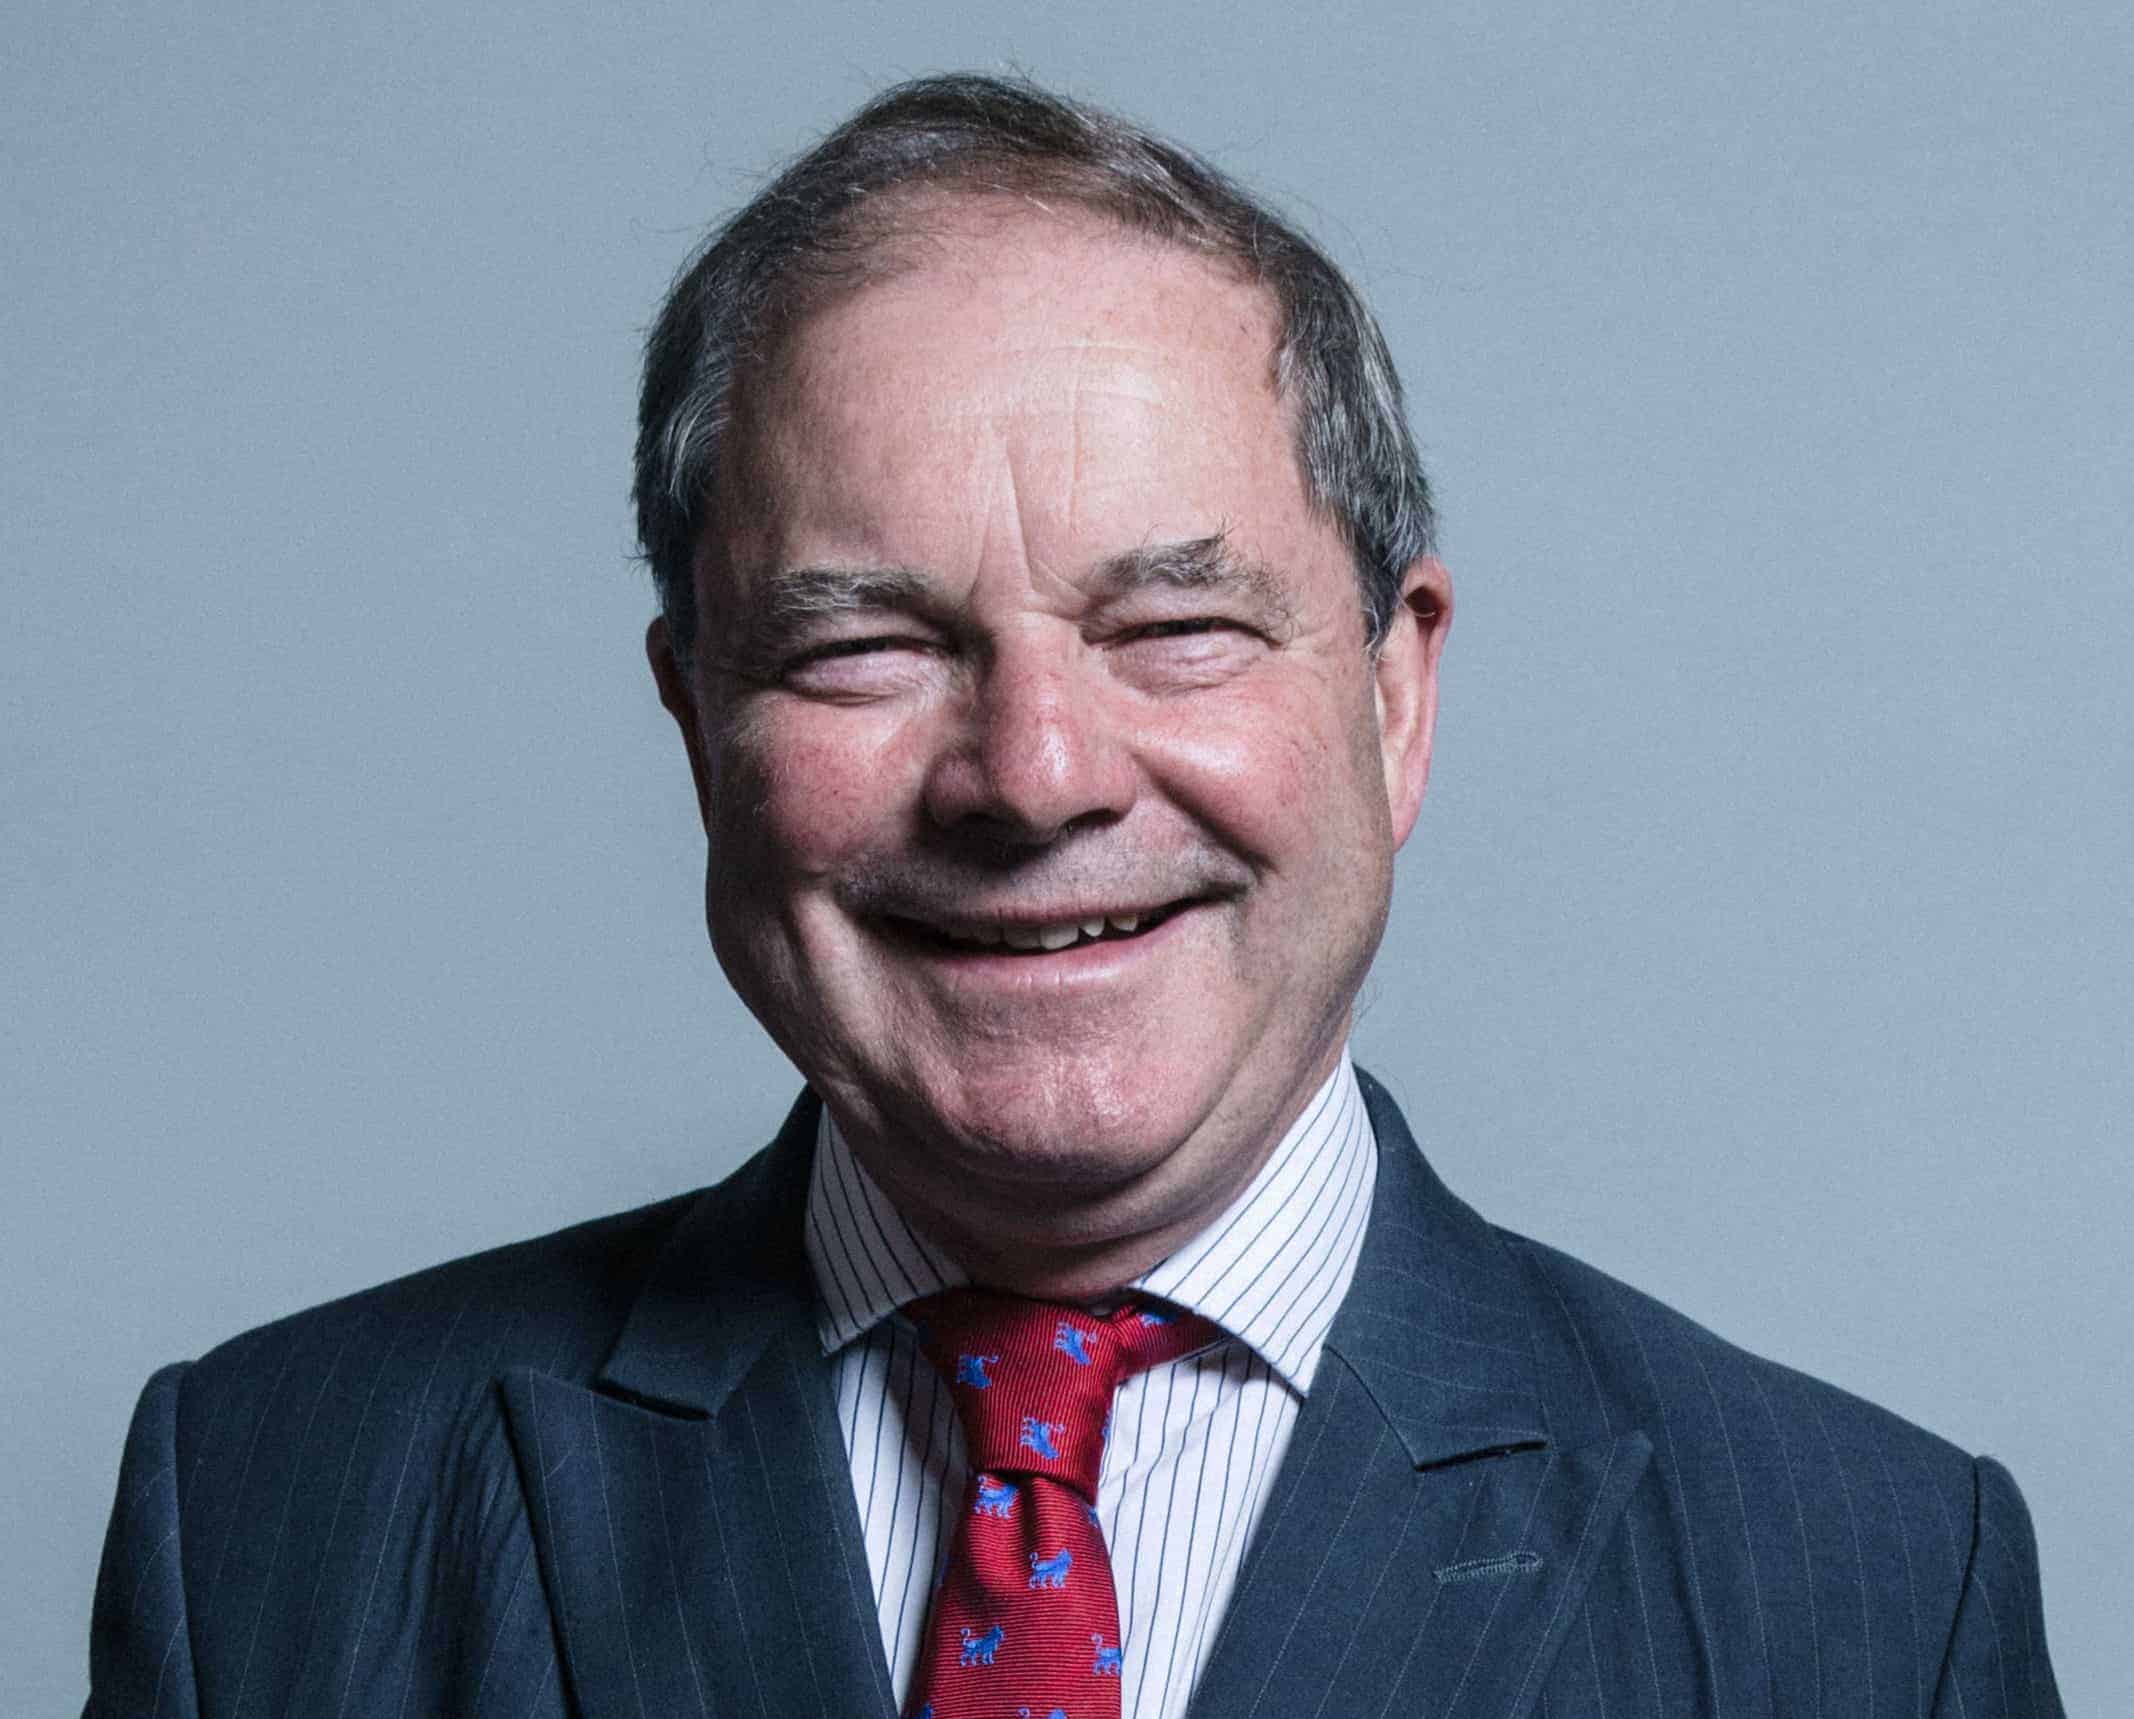 Sir Geoffrey Clifton-Brown kicked out of Tory conference, but who is he?